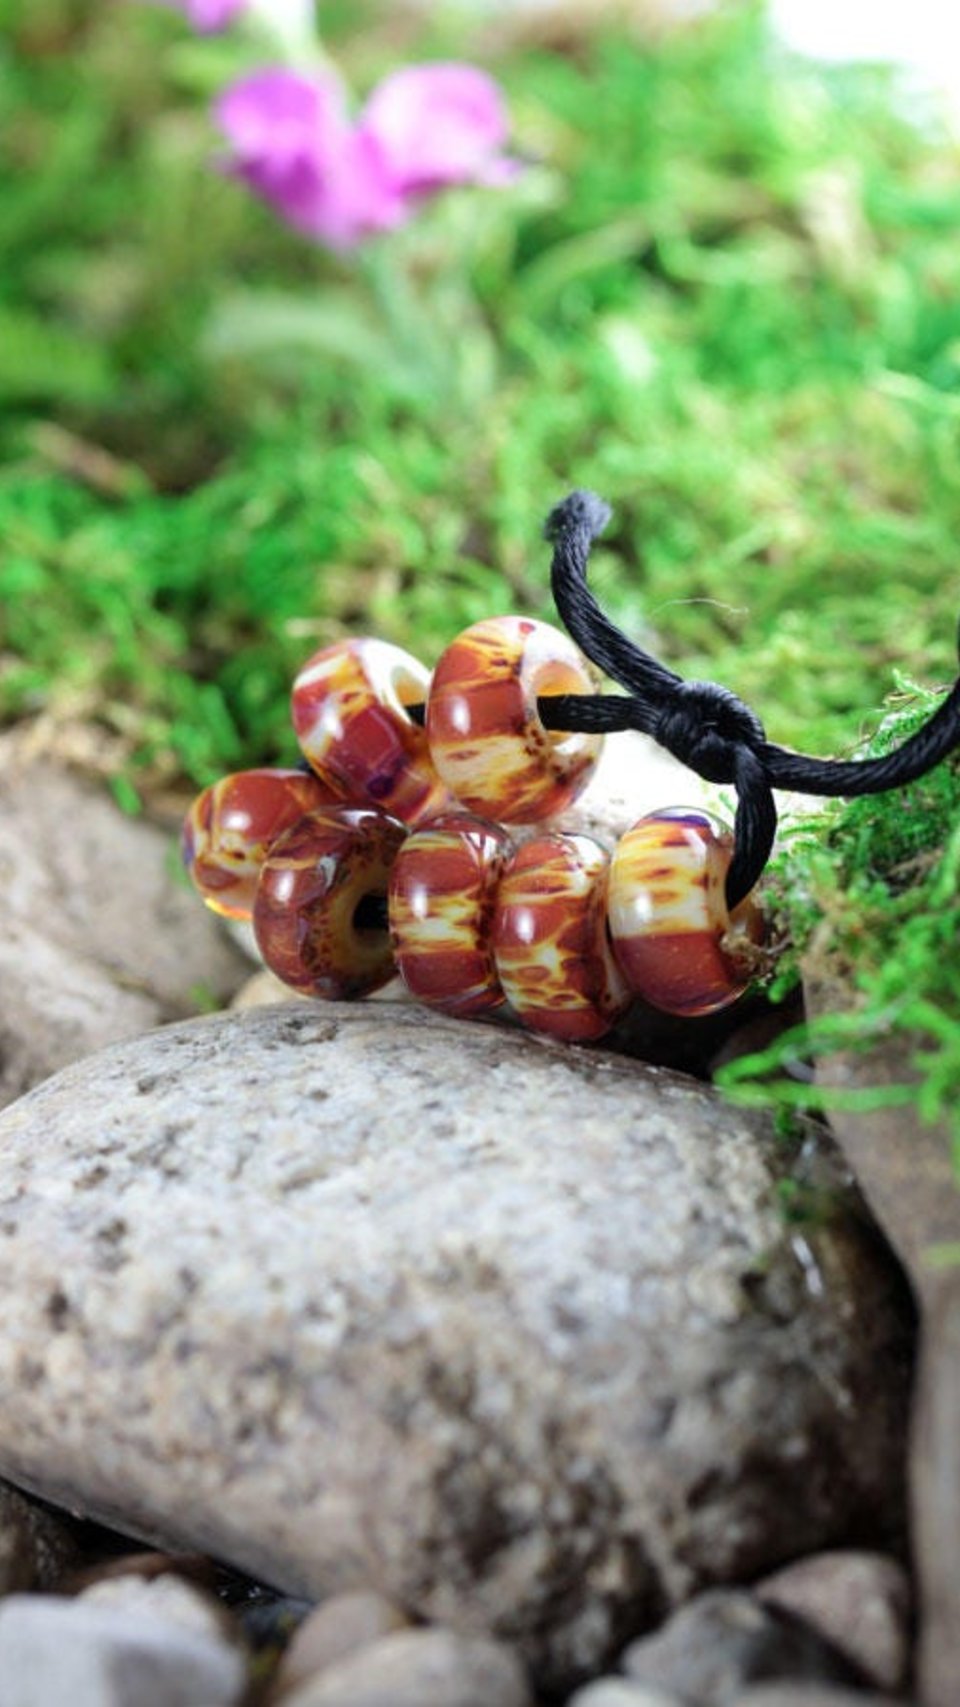 7 Loose Lampwork Rondelle Beads // Borosilicate/Boro Glass // Caramel Toffee Crunch Here I Come // Amber, Yellow, Brown // Z803